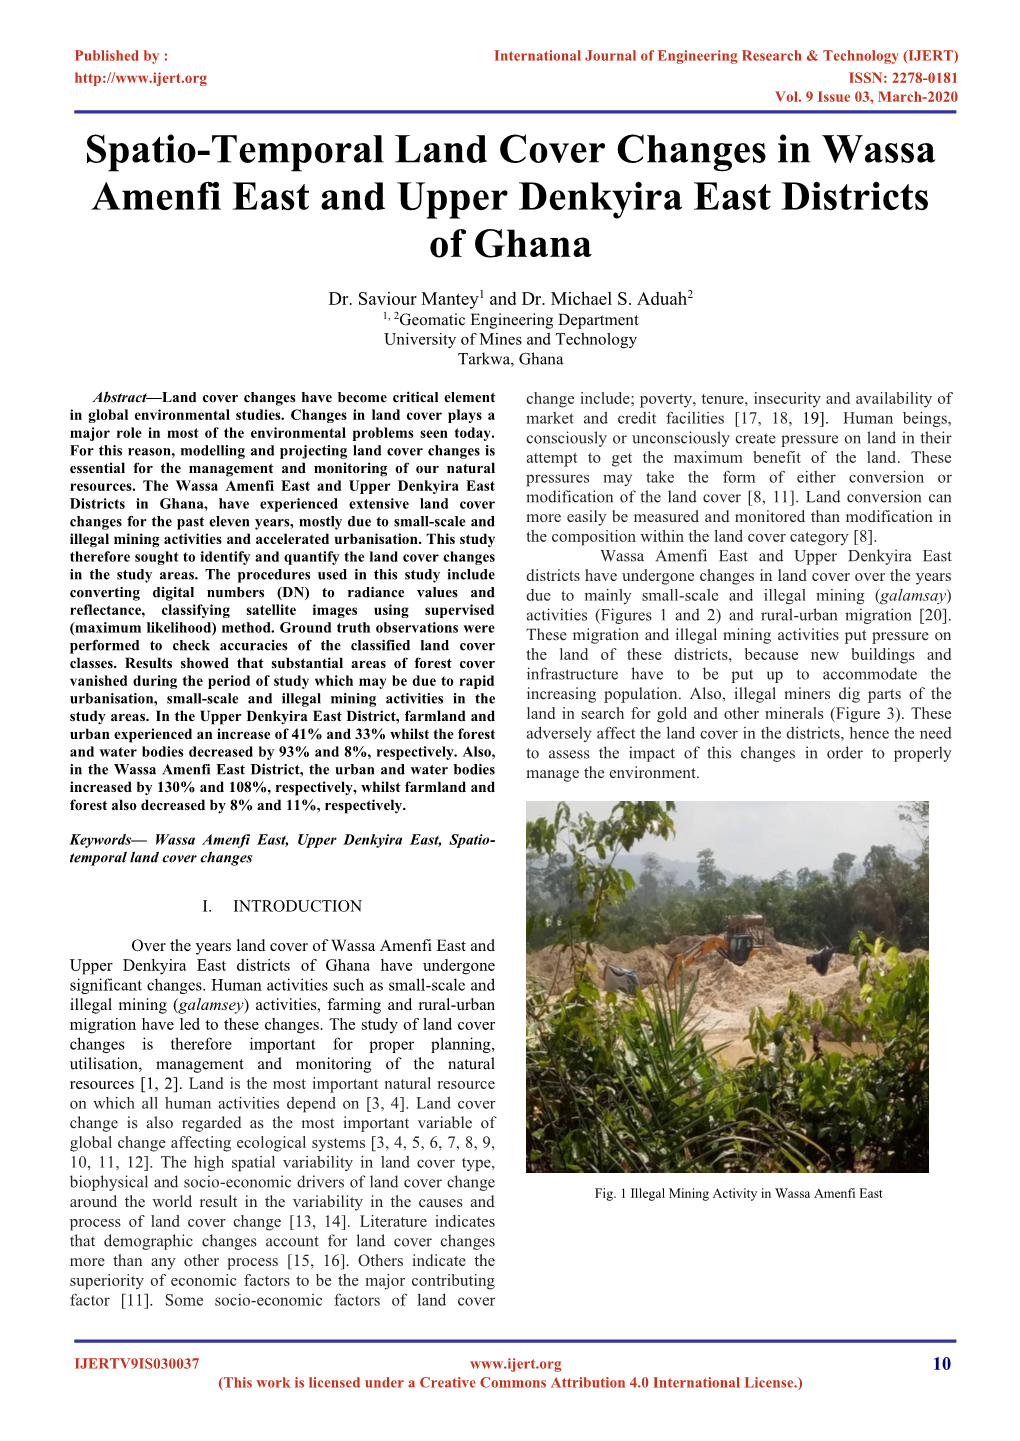 Spatio-Temporal Land Cover Changes in Wassa Amenfi East and Upper Denkyira East Districts of Ghana